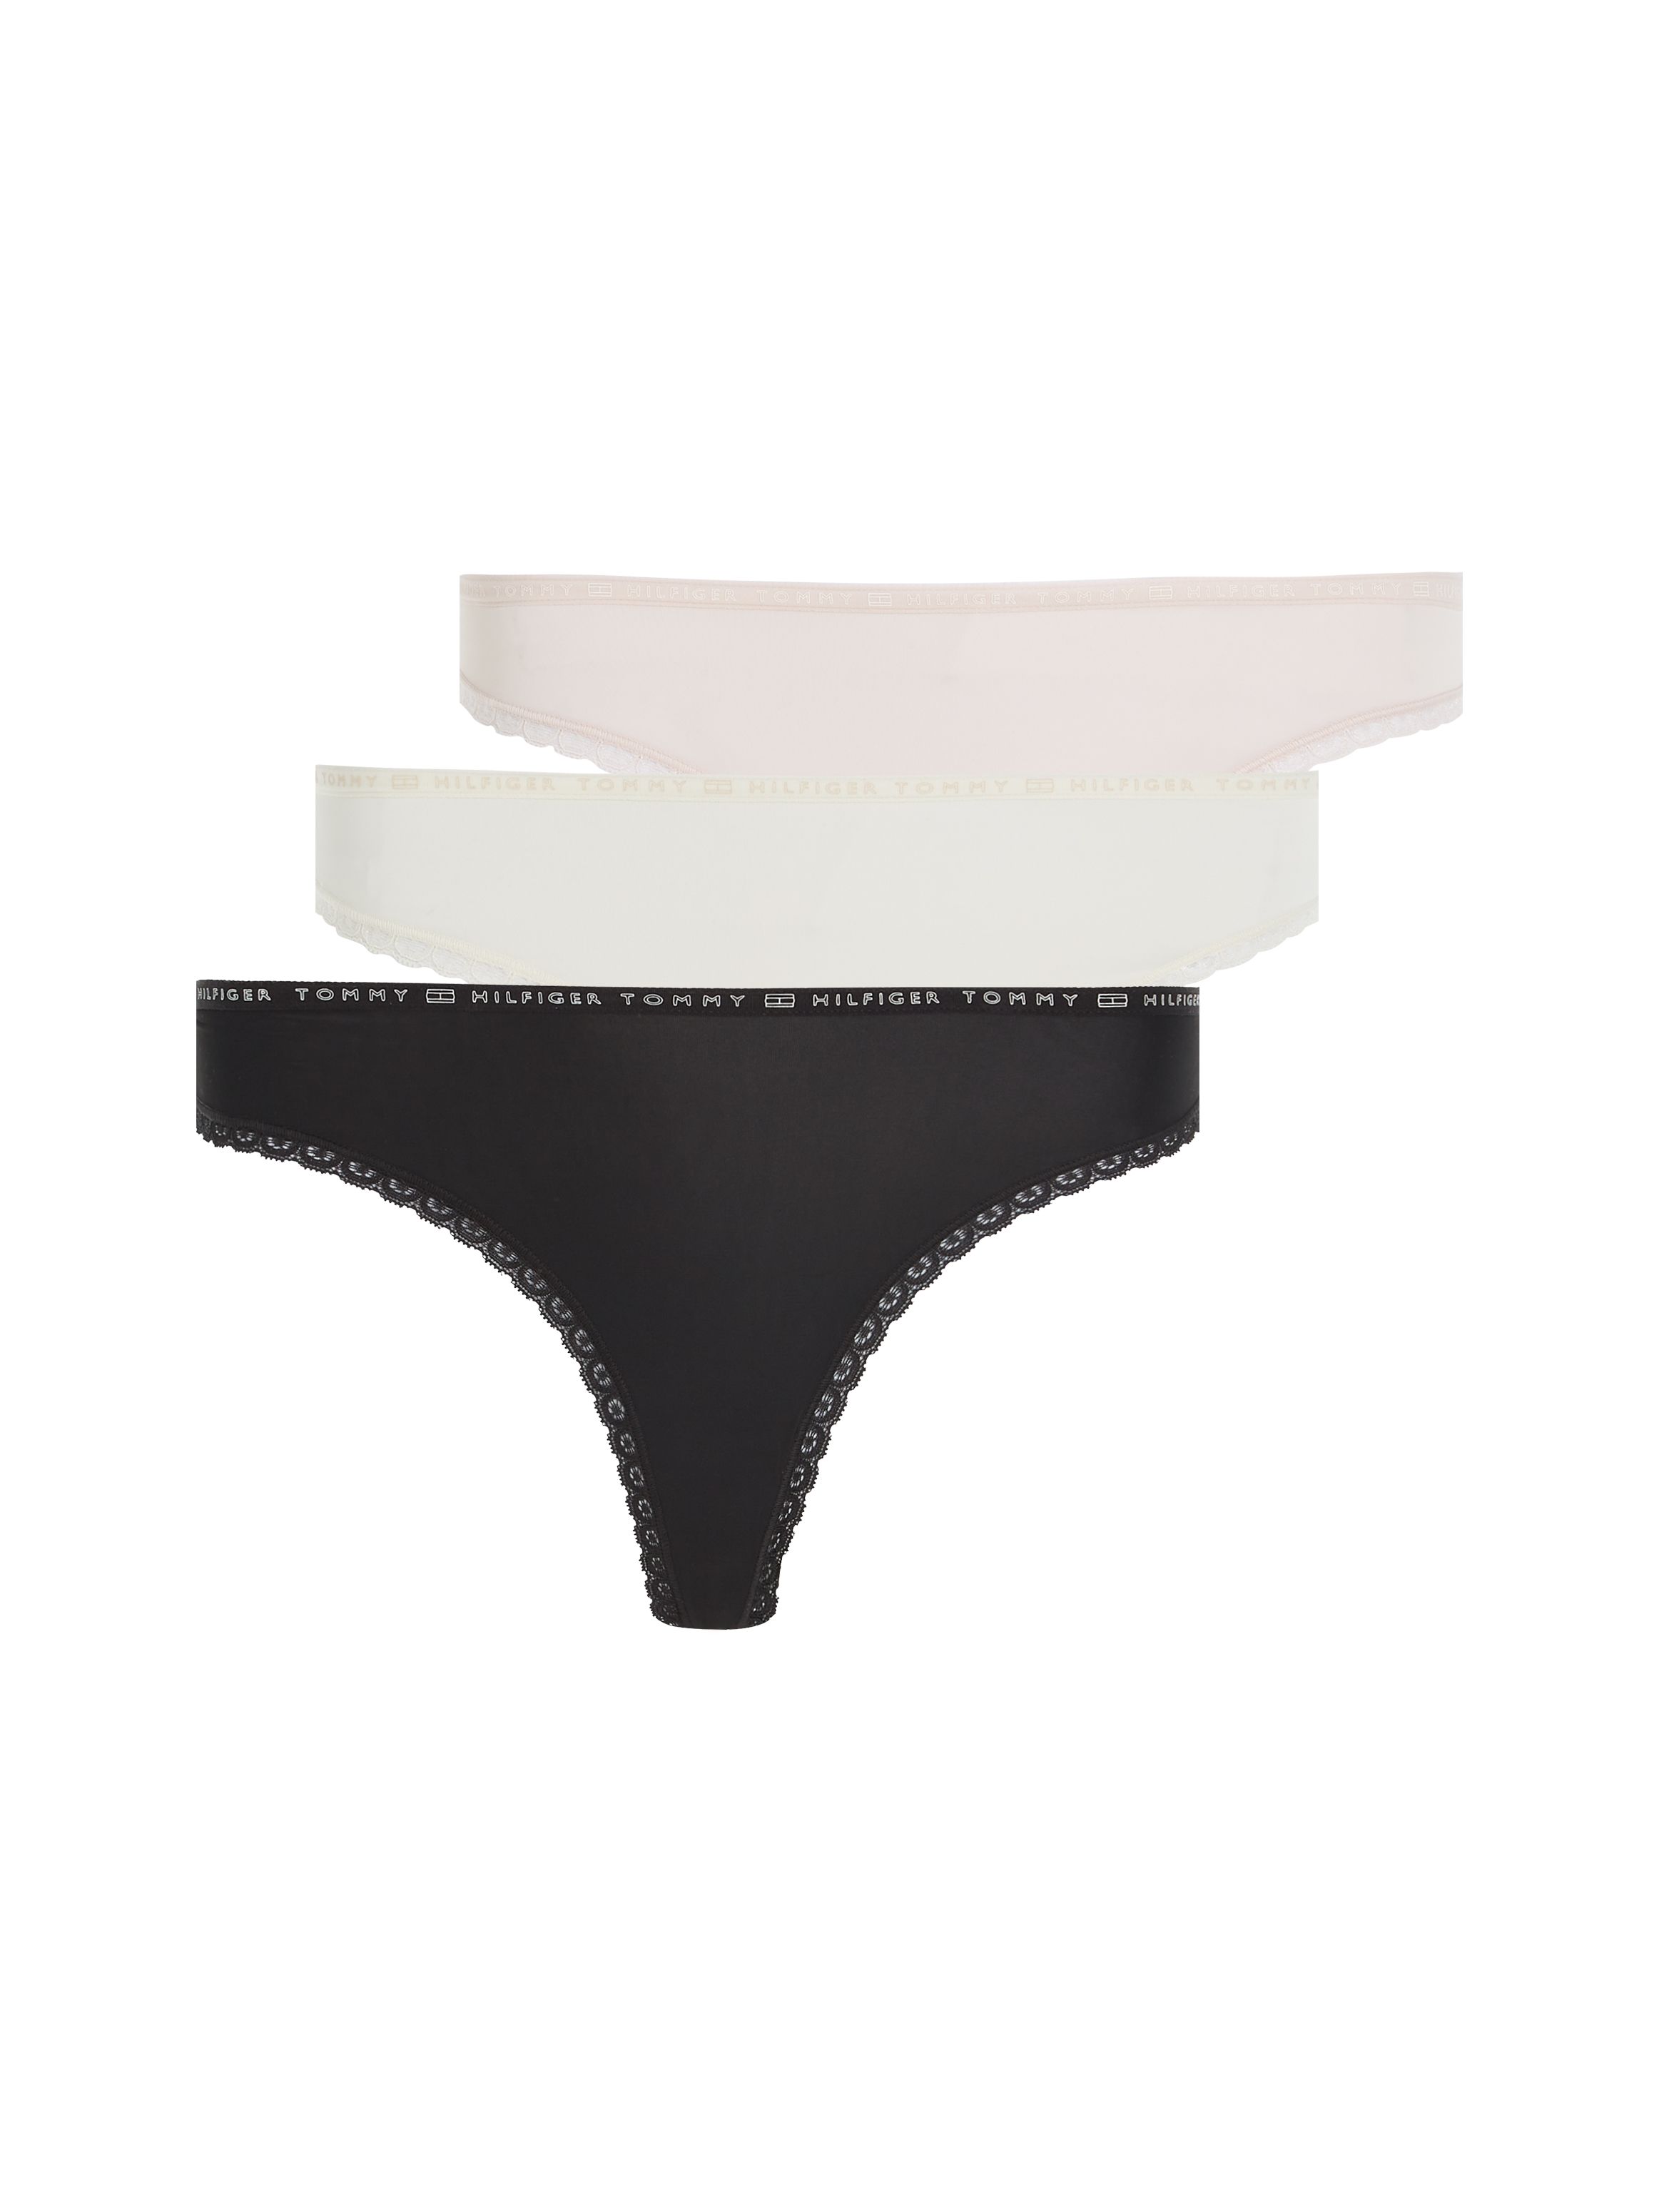 Tommy Hilfiger 3-Pack Thongs